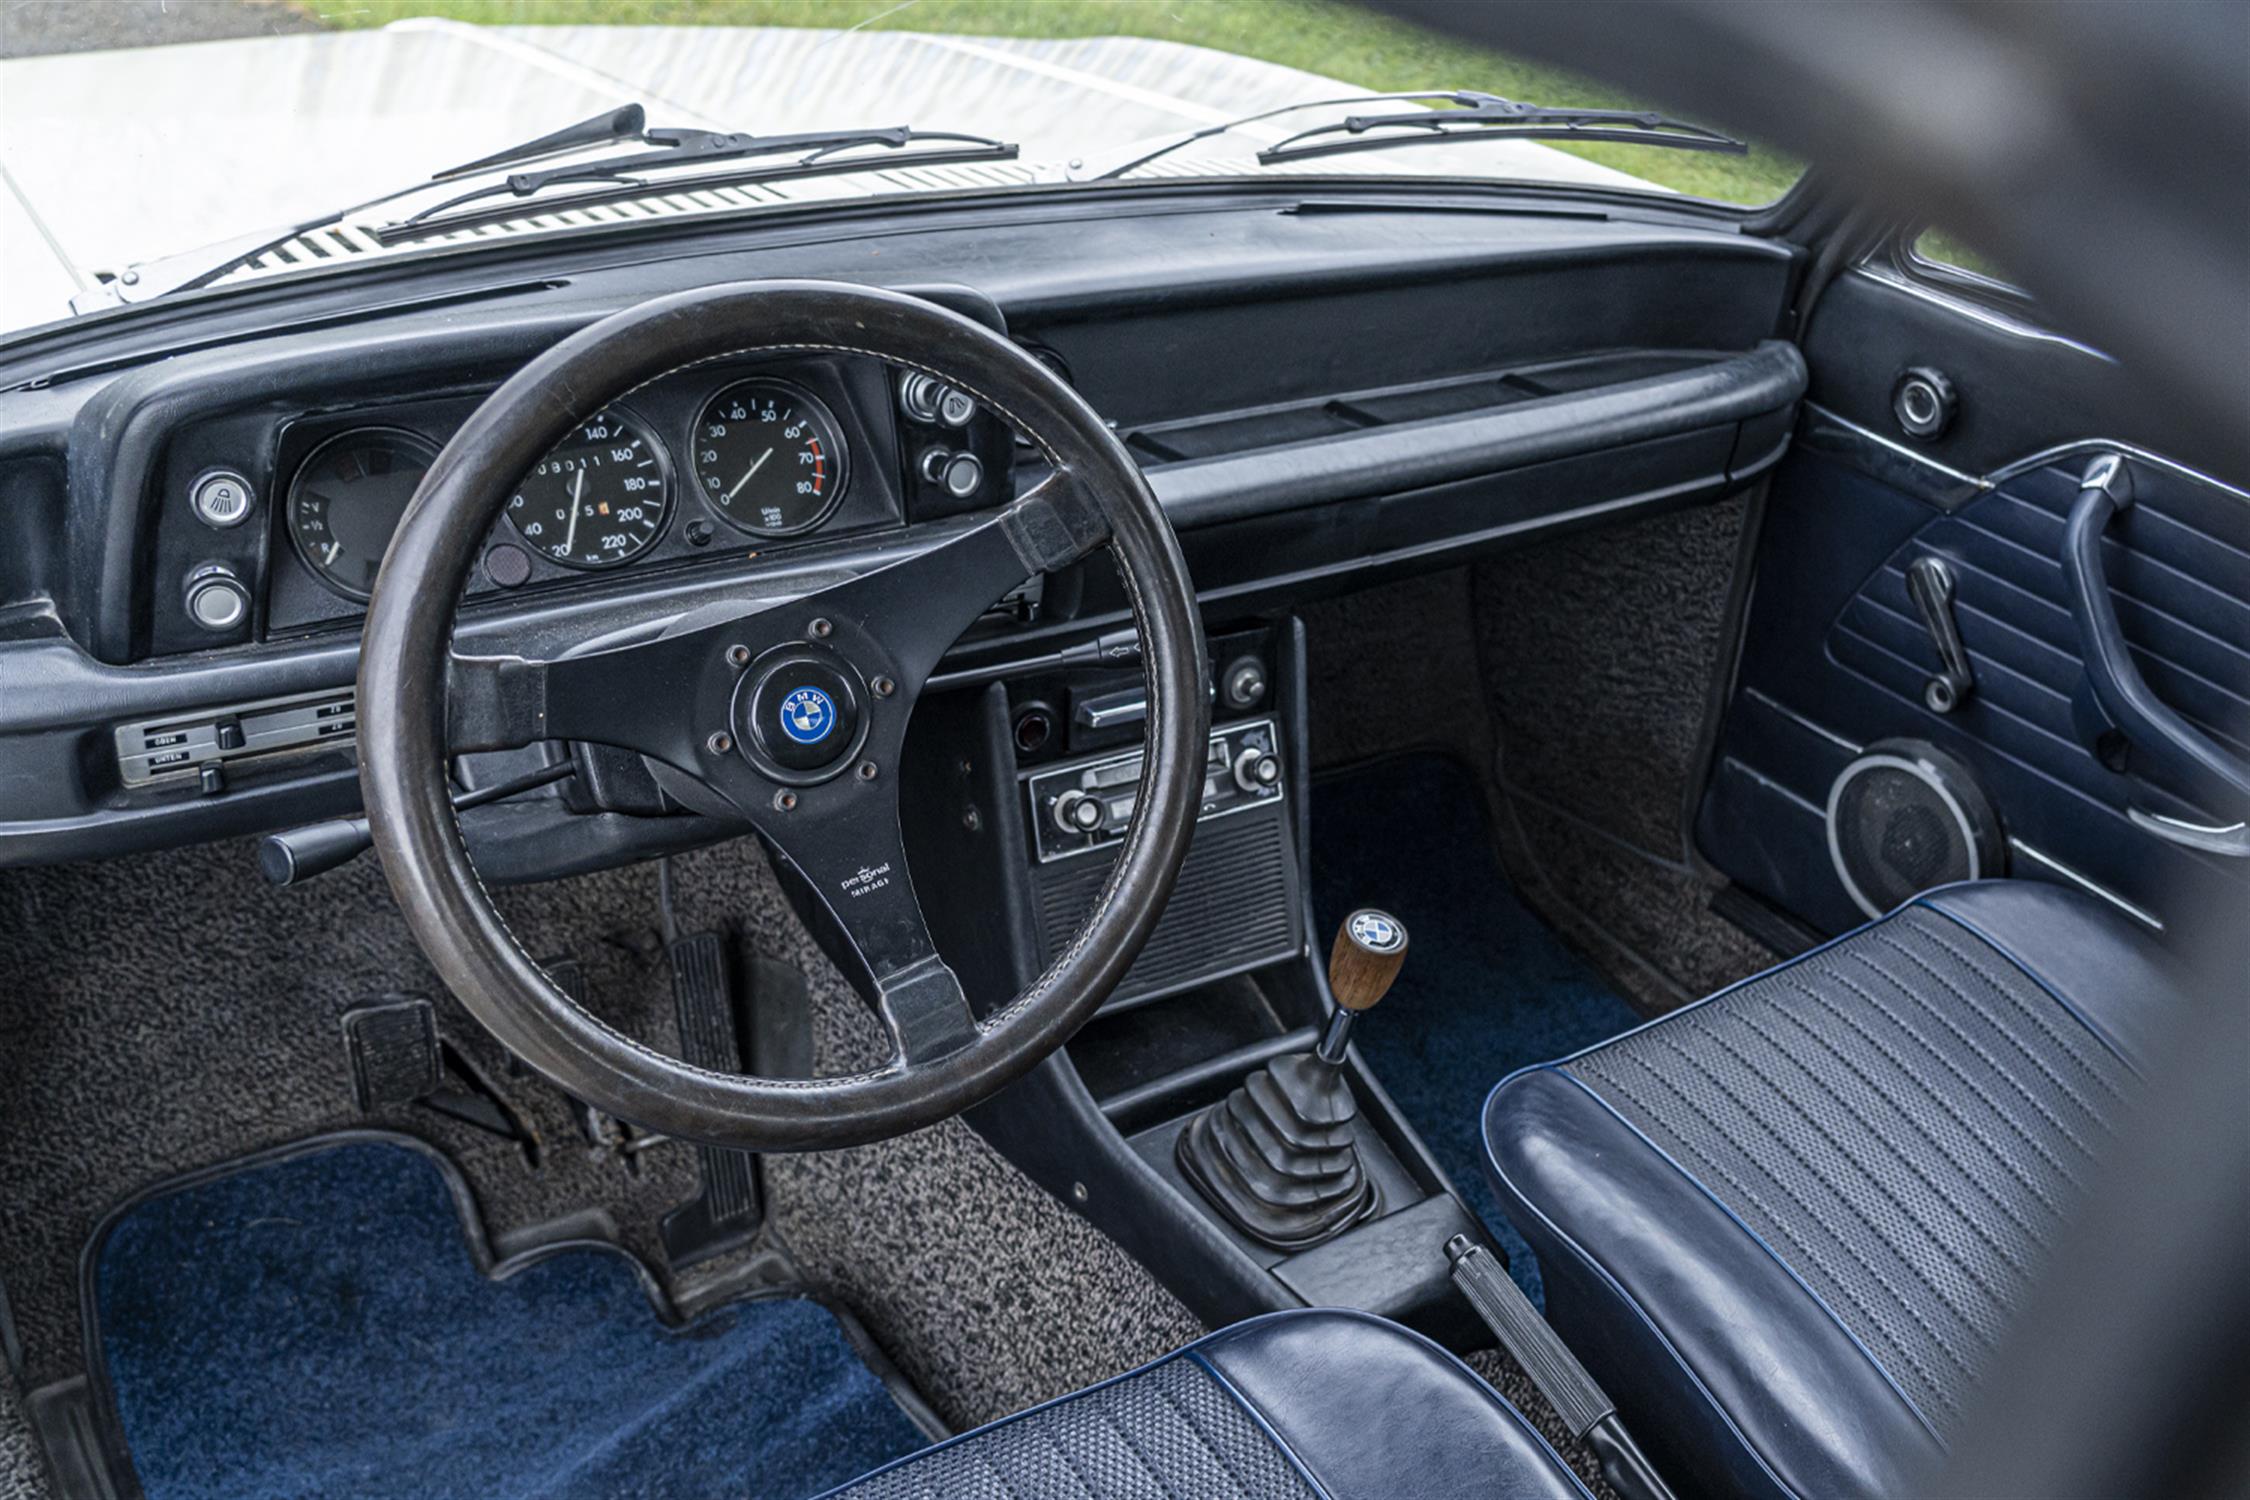 1972 BMW 2002 Tii - Image 3 of 10